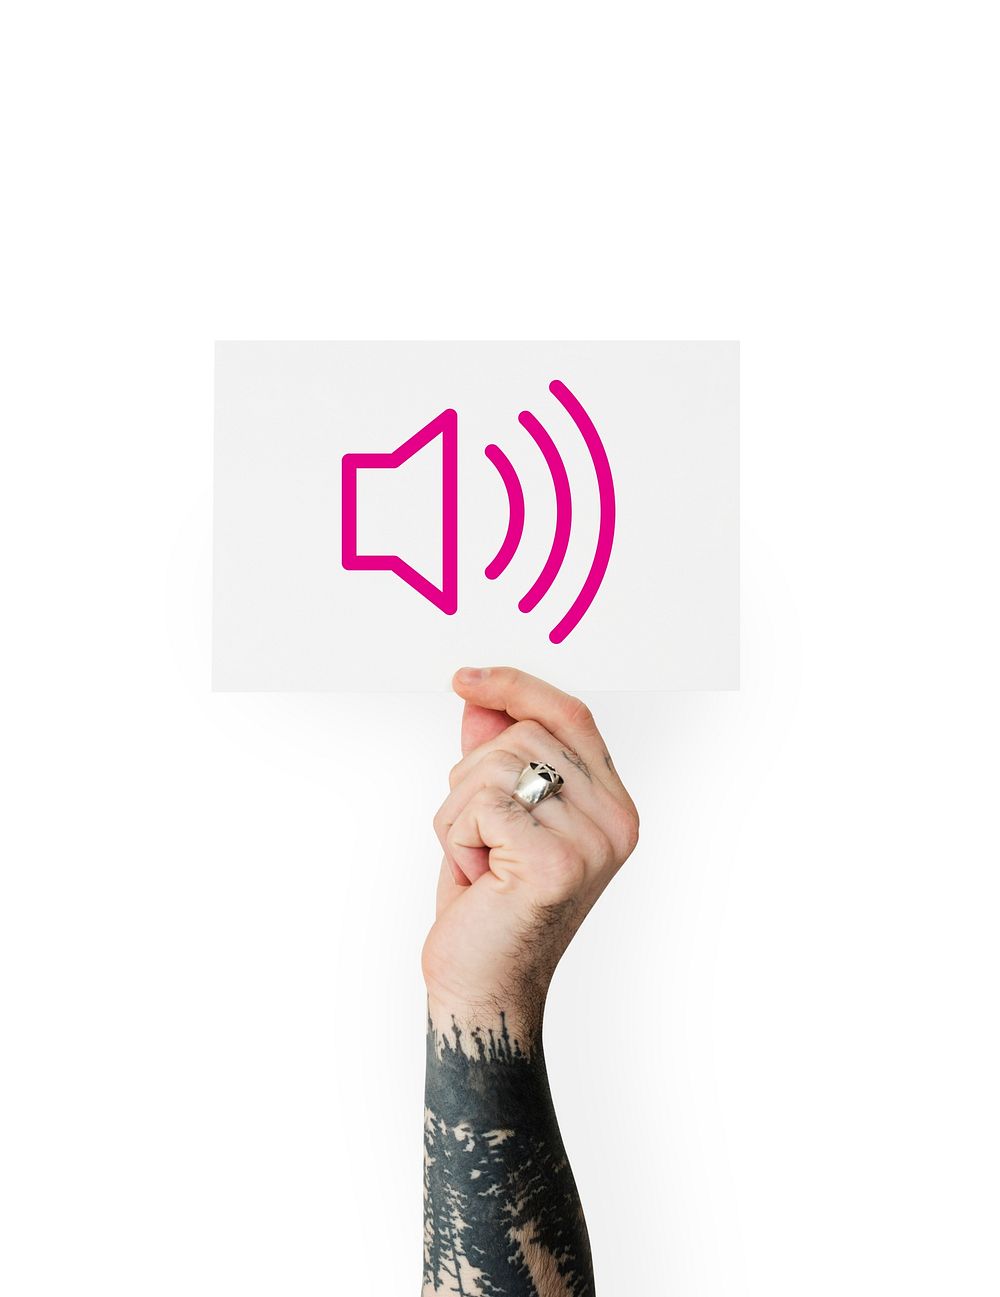 Speaker button icon graphic with people studio shoot